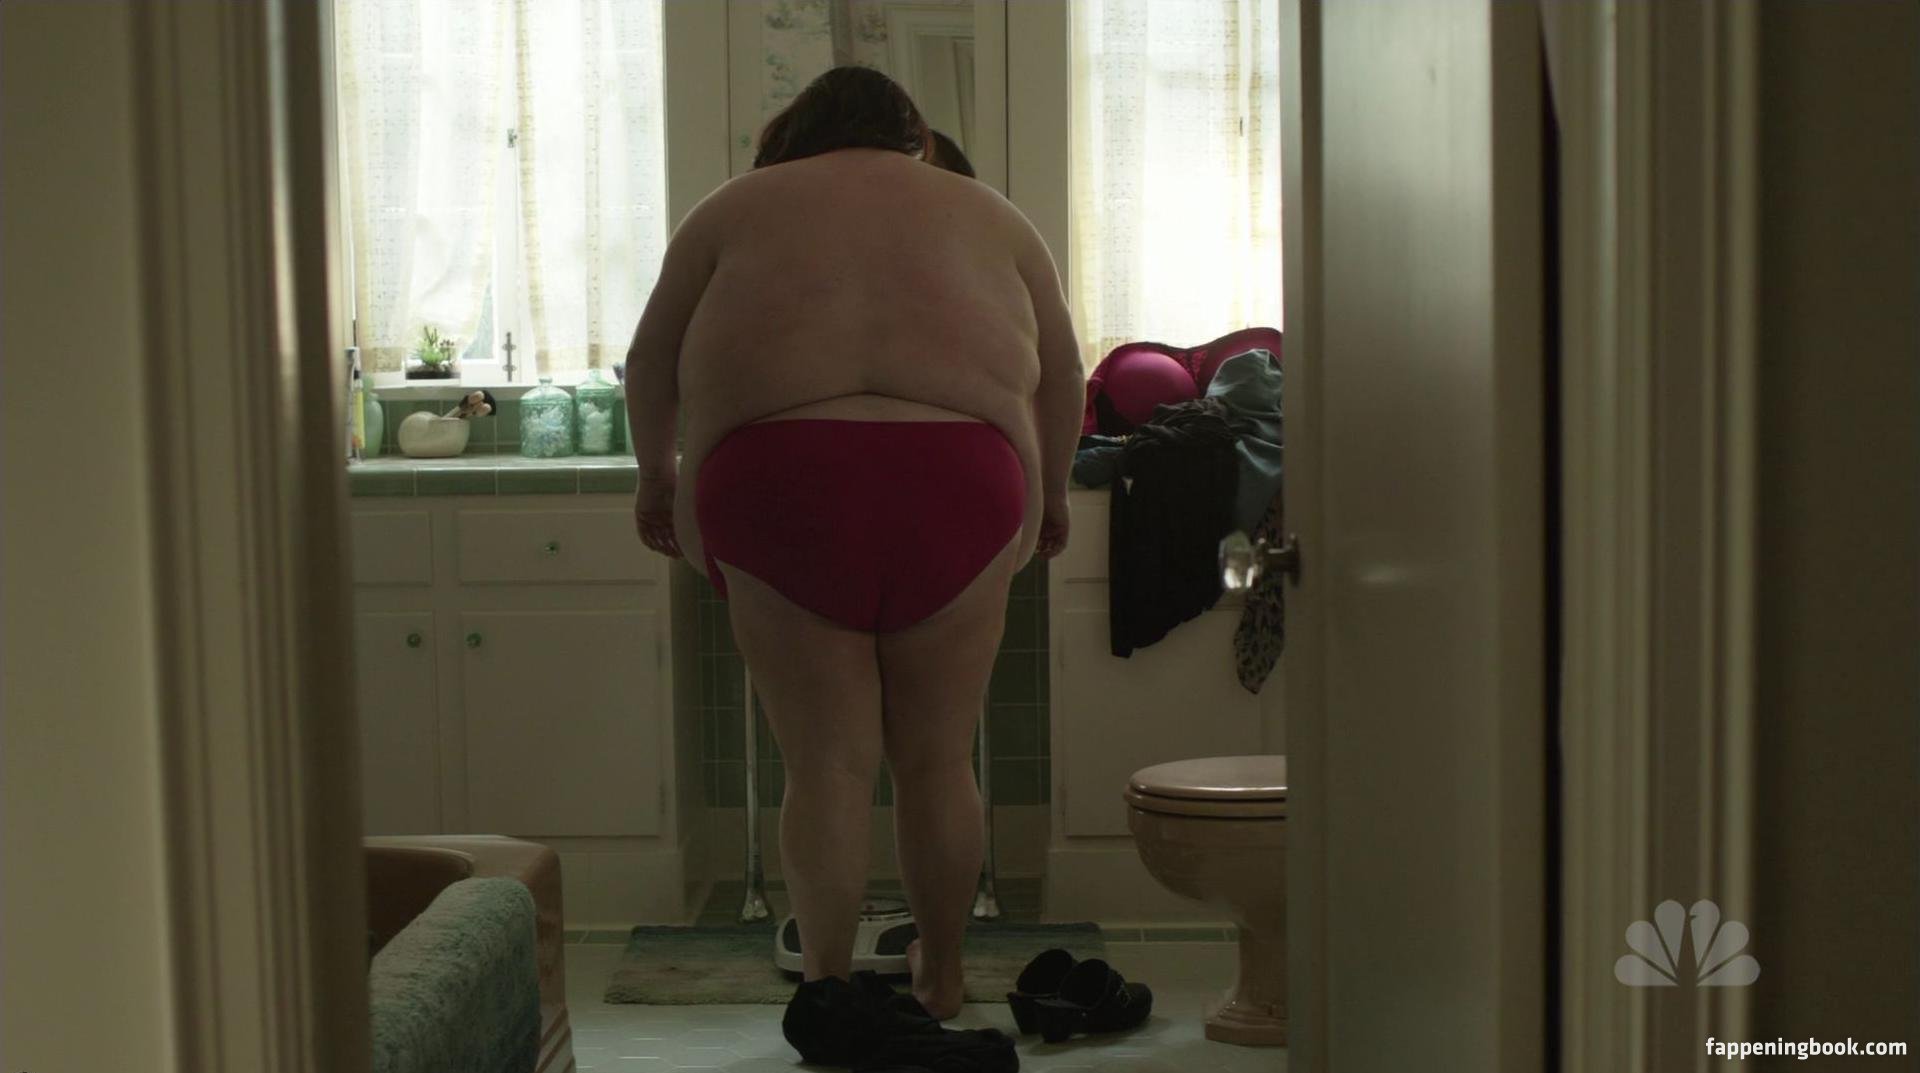 Chrissy Metz Nude The Girl Girl 0 Hot Sex Picture